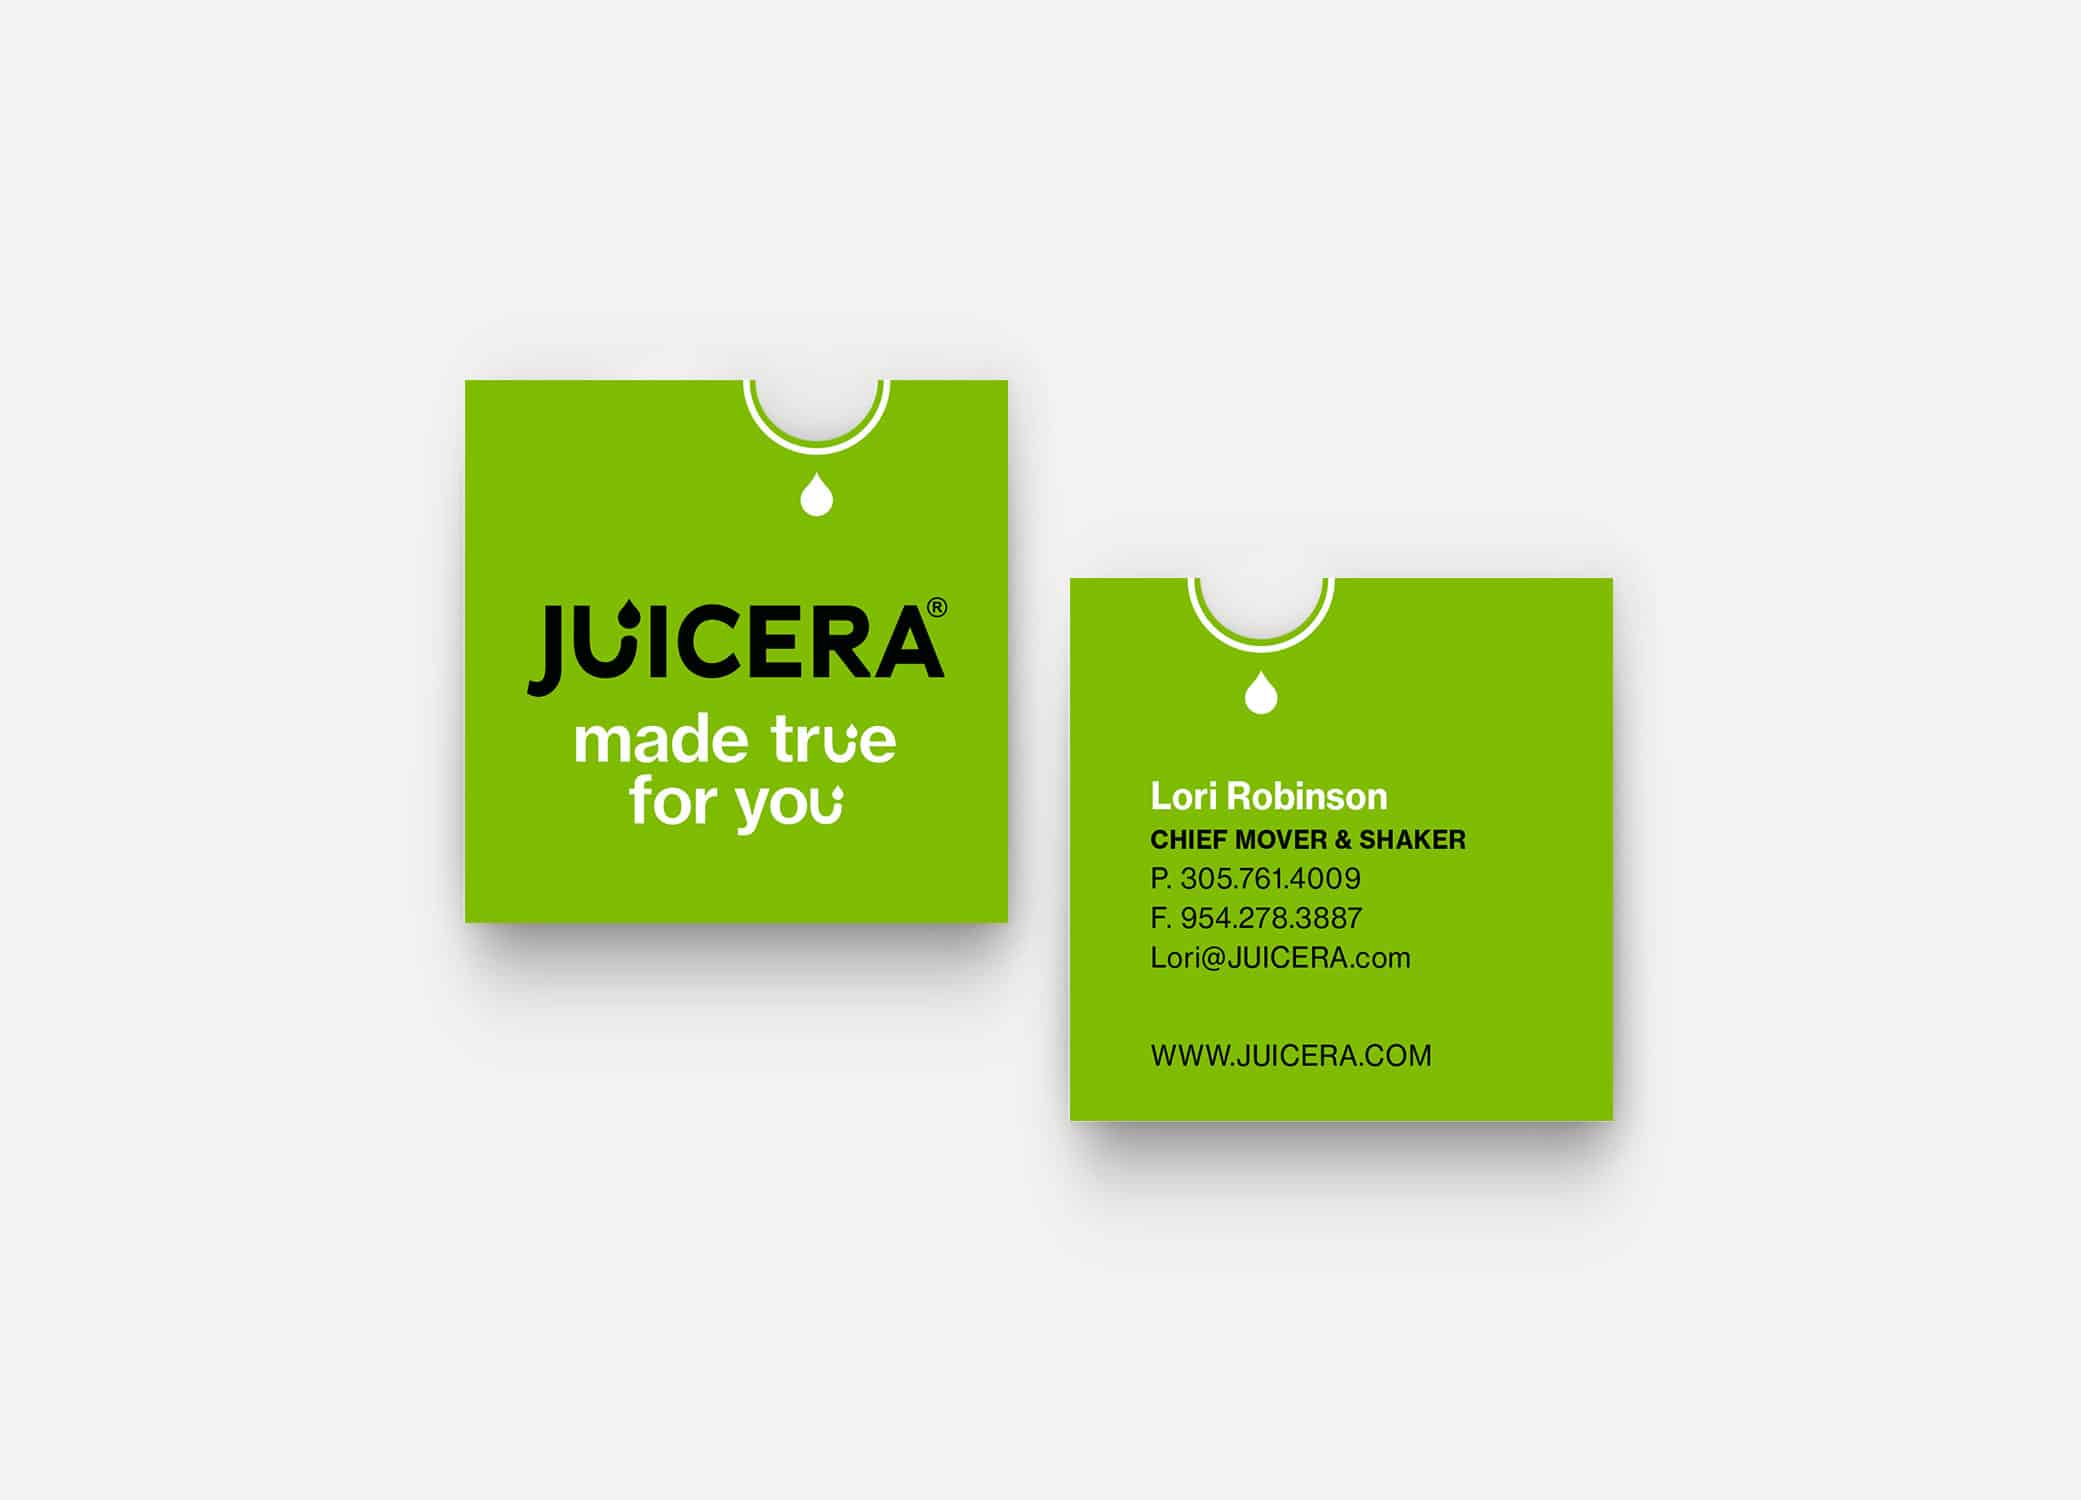 Juicera business cards front and back view in bold green with half-moon die-cut.